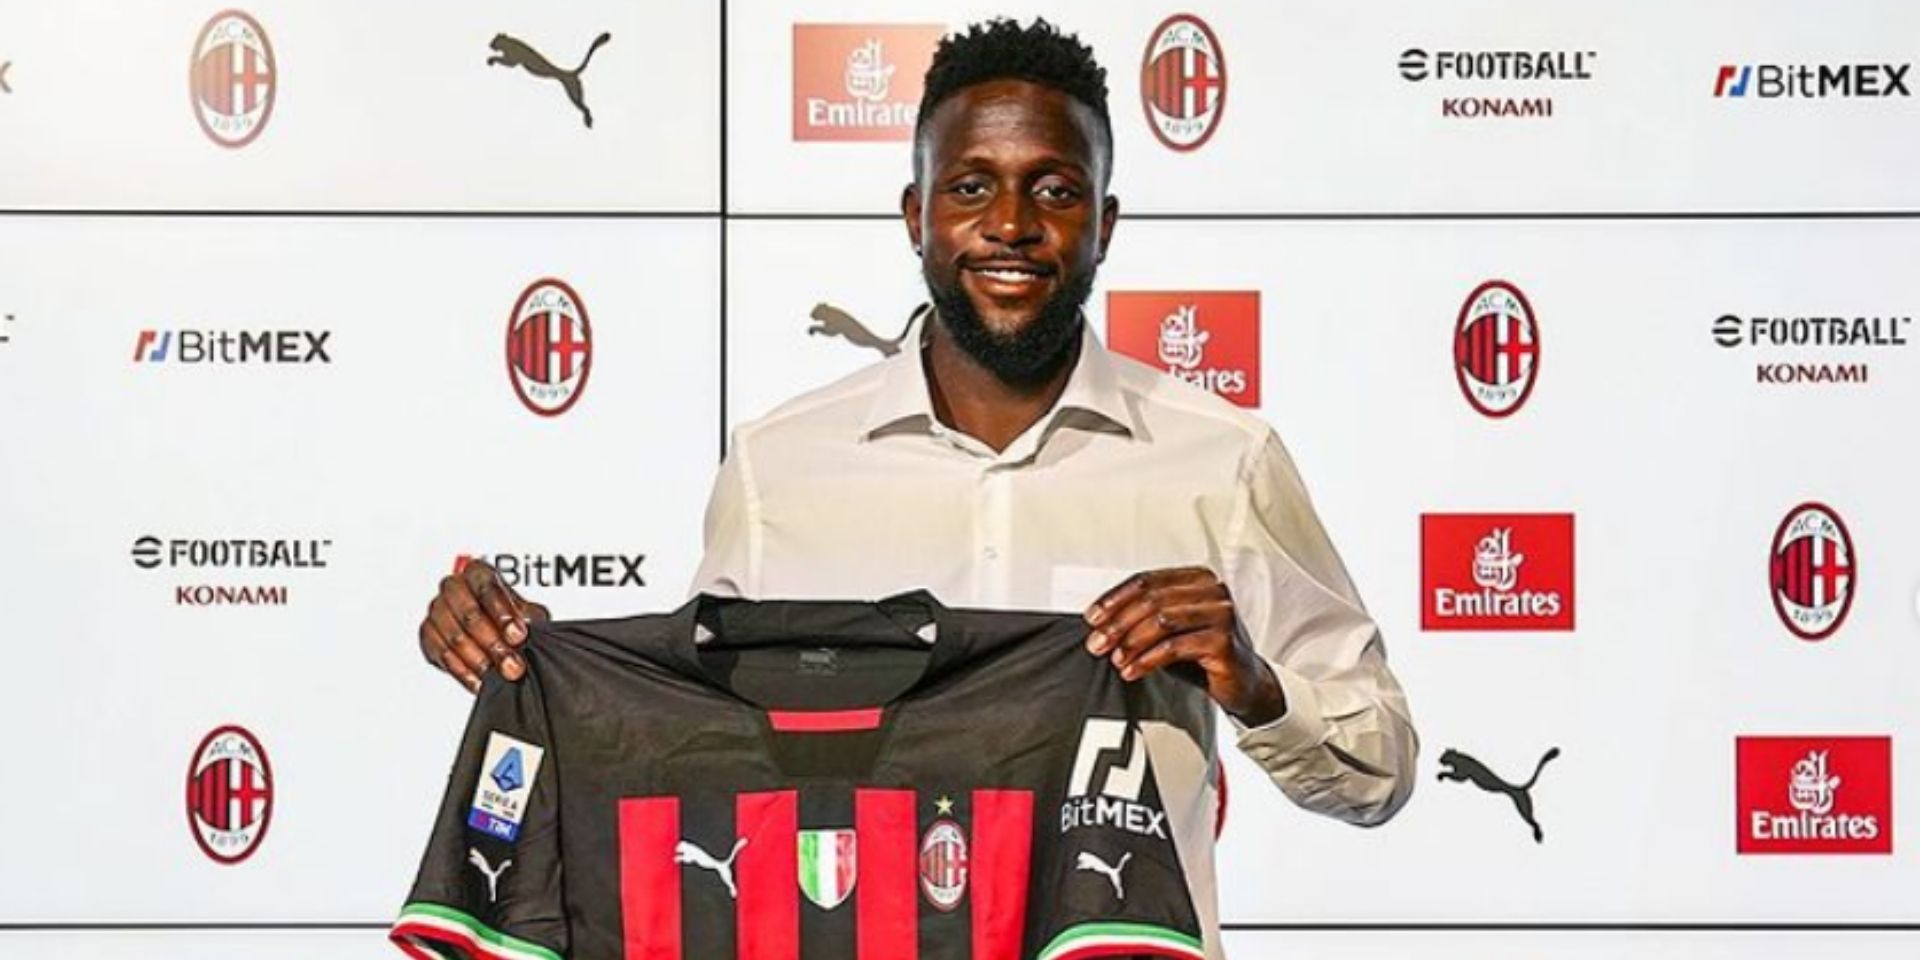 ‘Focused’ – Divock Origi on his move to AC Milan as he poses alongside Paolo Maldini and his new home shirt